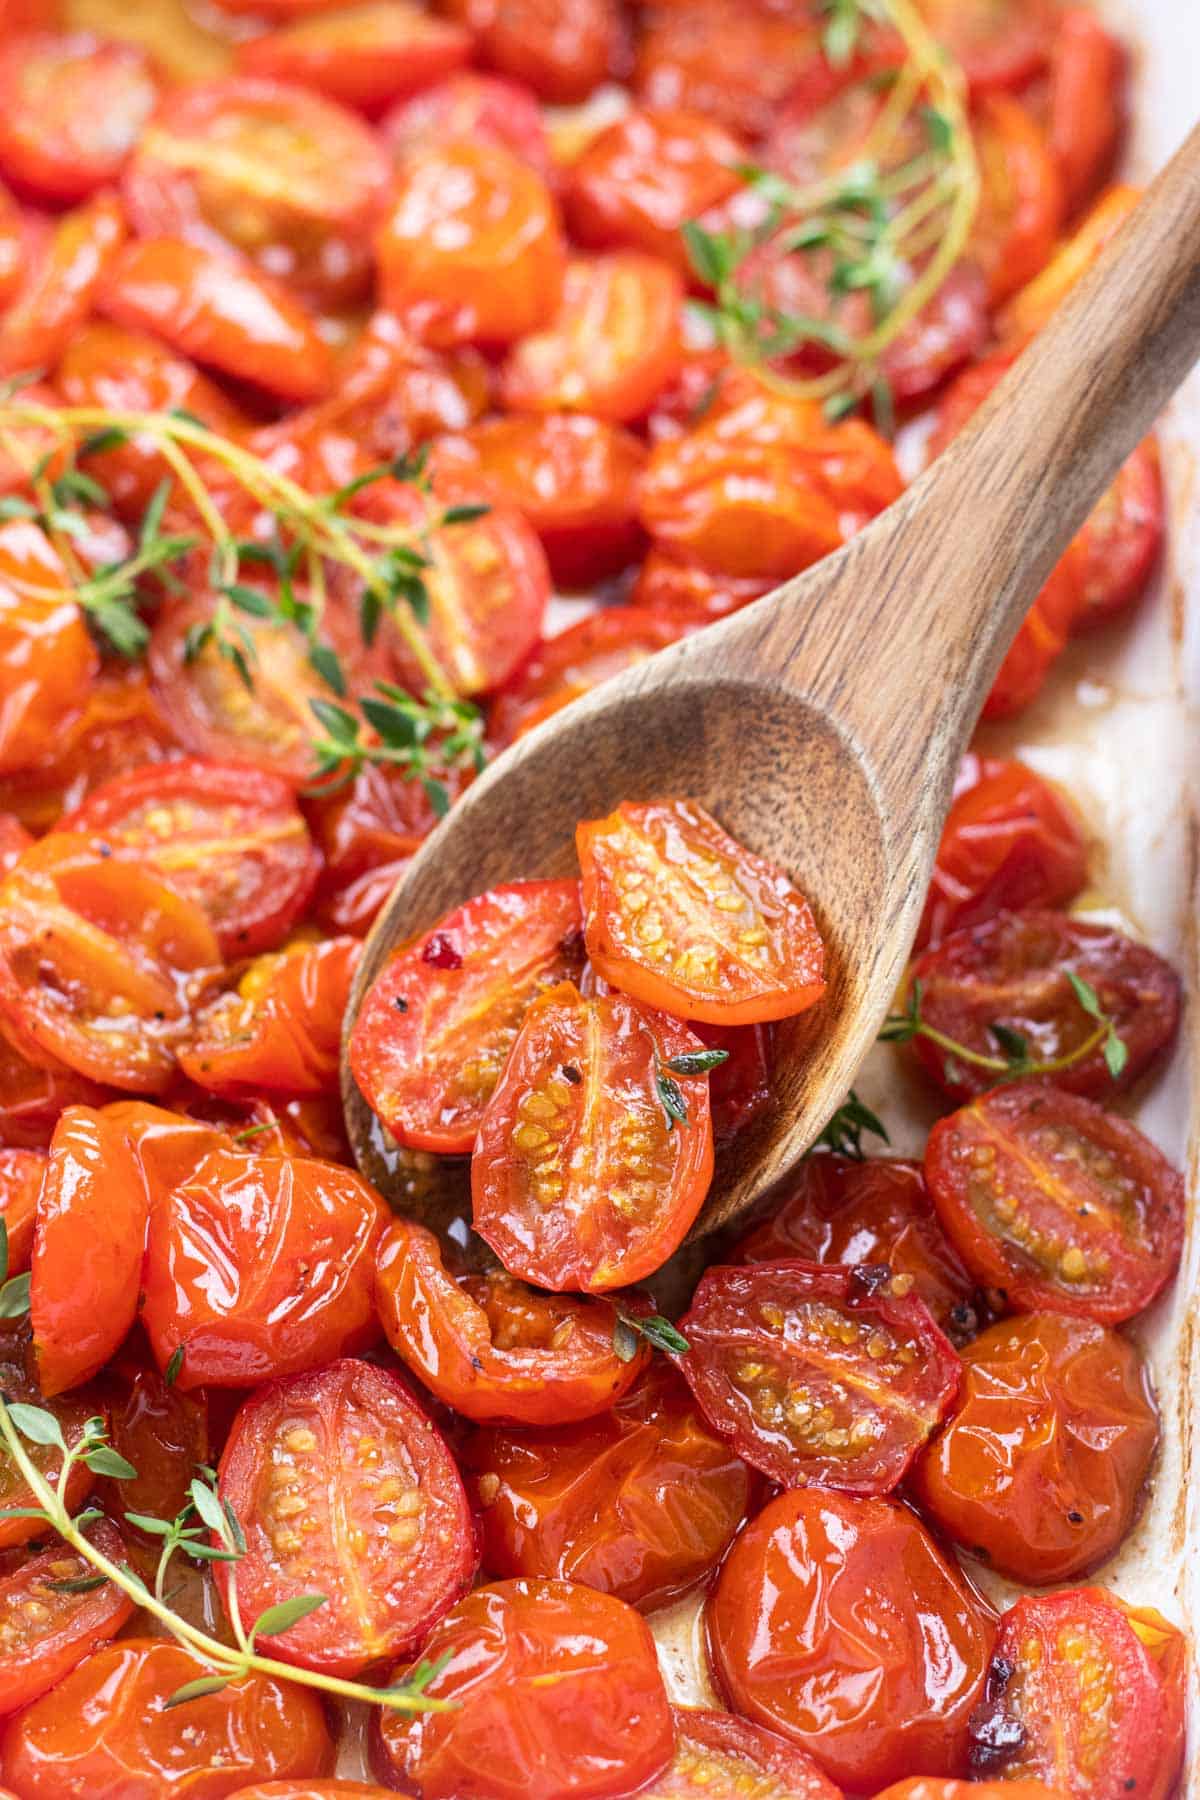 Roasted halved red cherry tomatoes in a white baking pan with a wooden spoon.